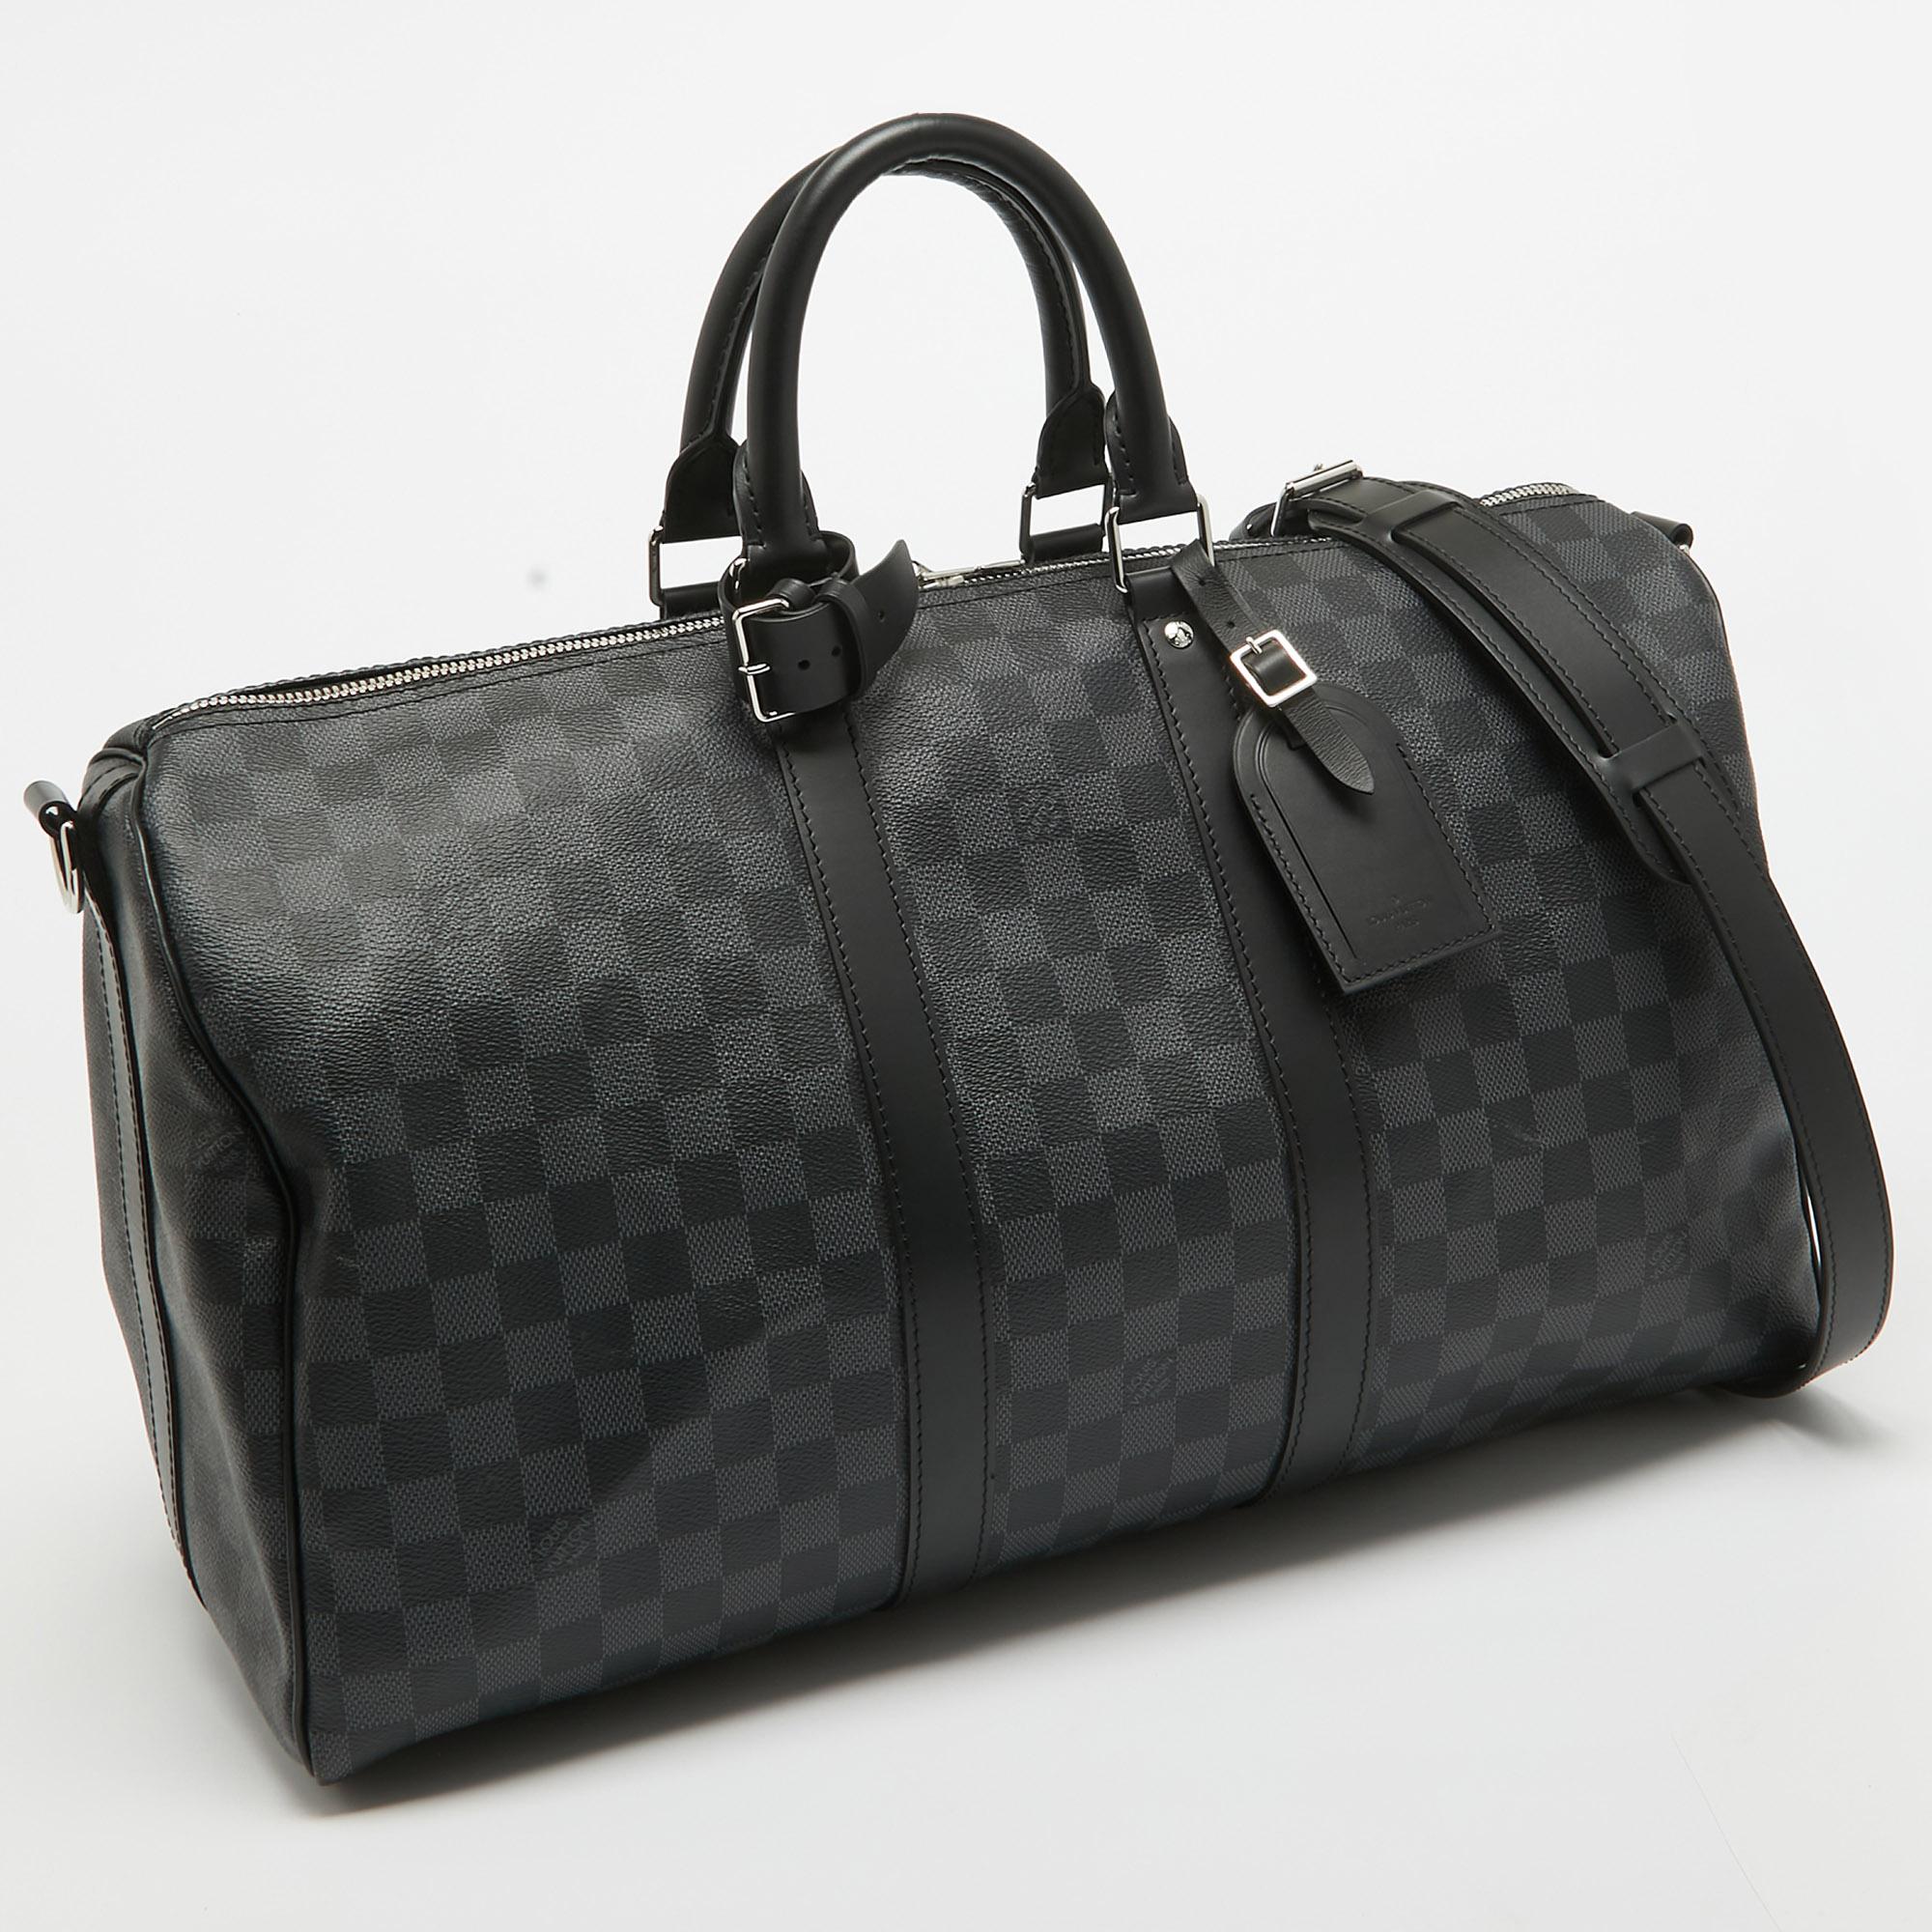 Crafted with precision, the Louis Vuitton Keepall Bandoulière exudes understated luxury. Its sleek design, adorned with the iconic Damier pattern, offers timeless appeal. Equipped with a comfortable shoulder strap, it seamlessly combines style with